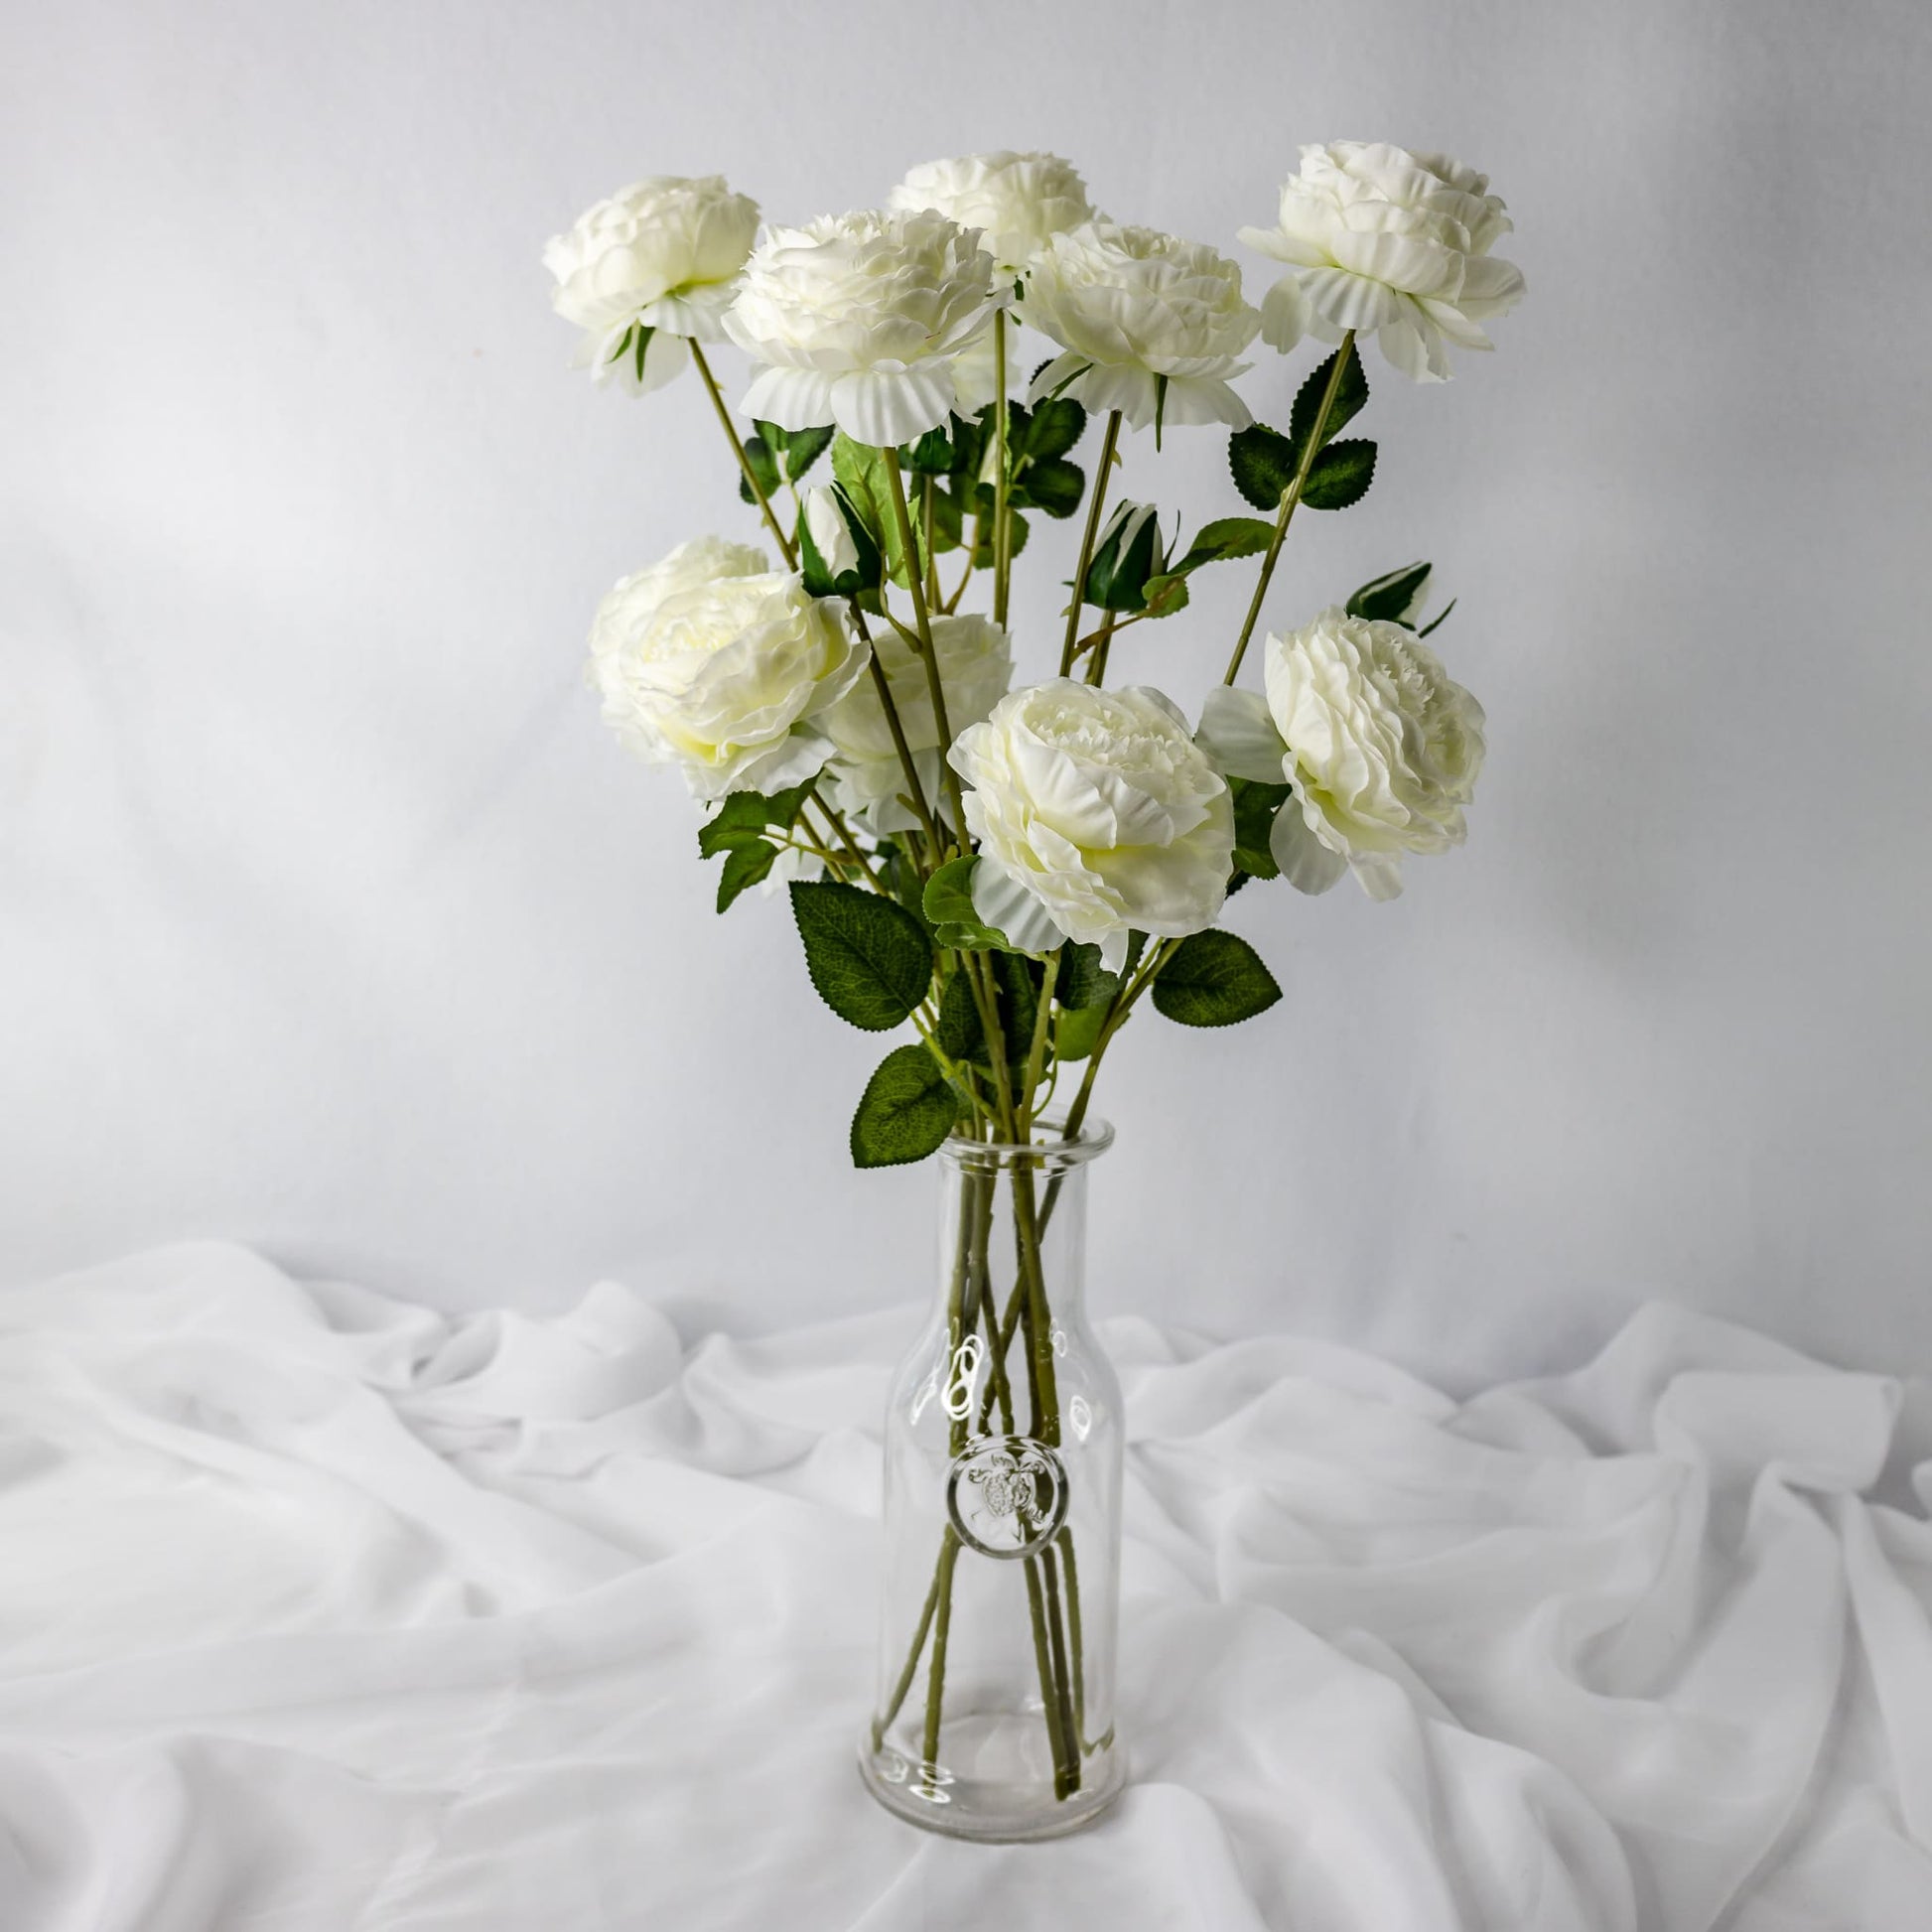 artificial white mini peonies placed in transparent glass vase